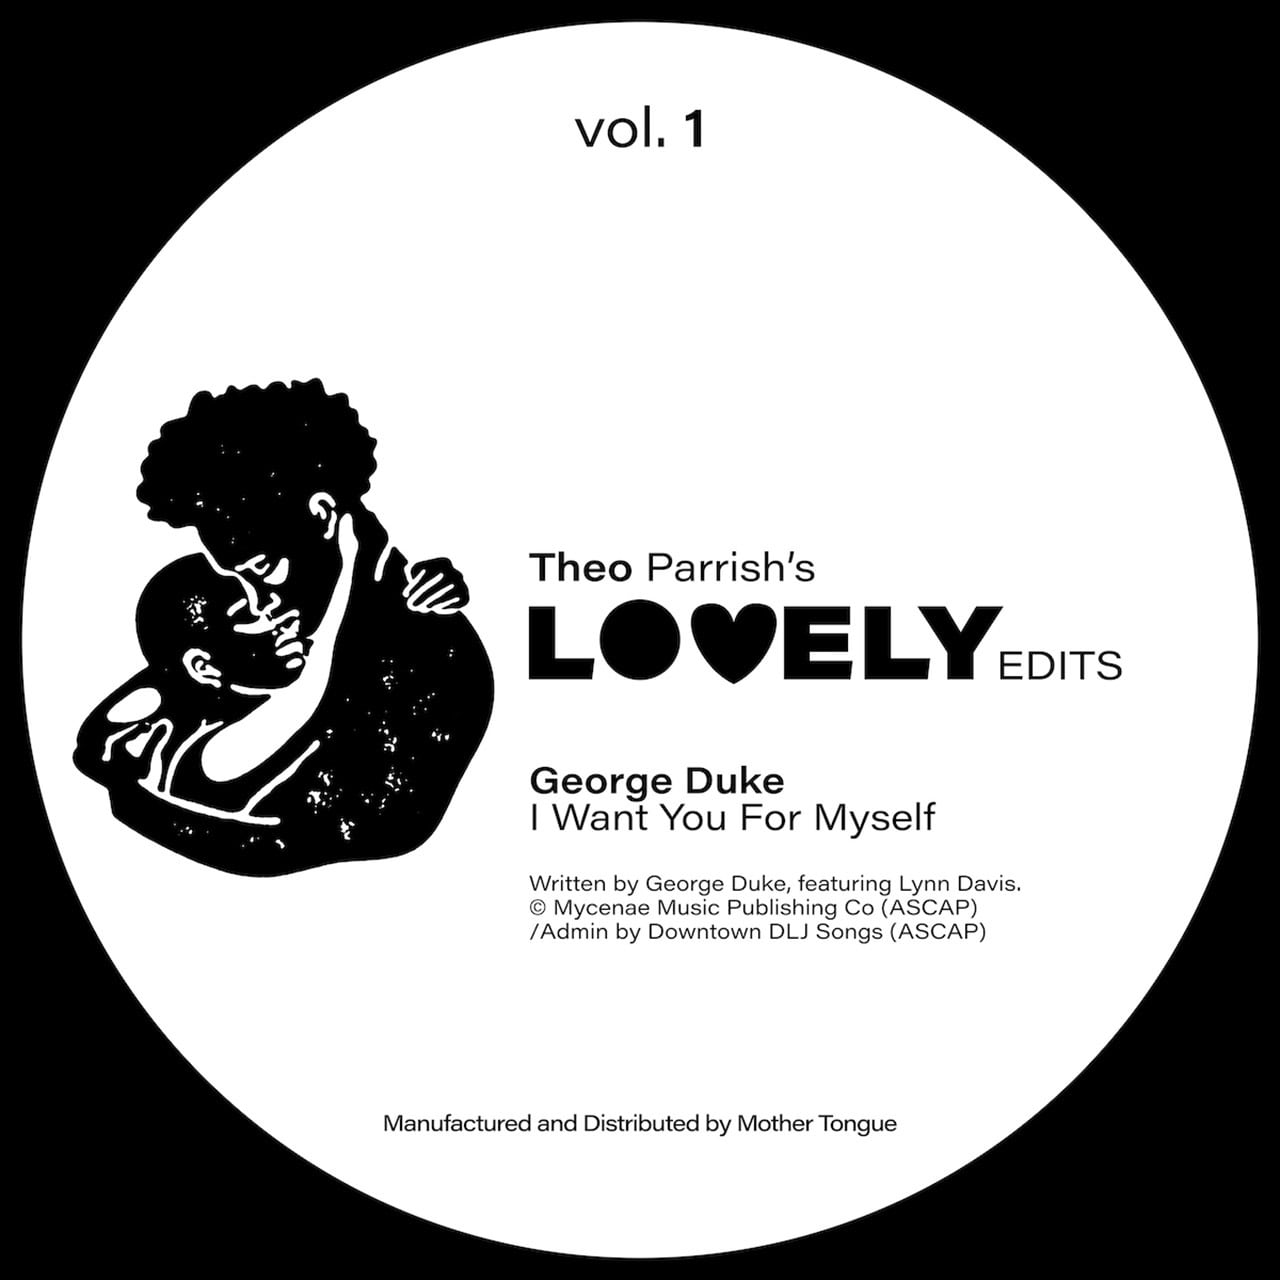 【12"】Theo Parrish - Lovely Edits Vol. 1